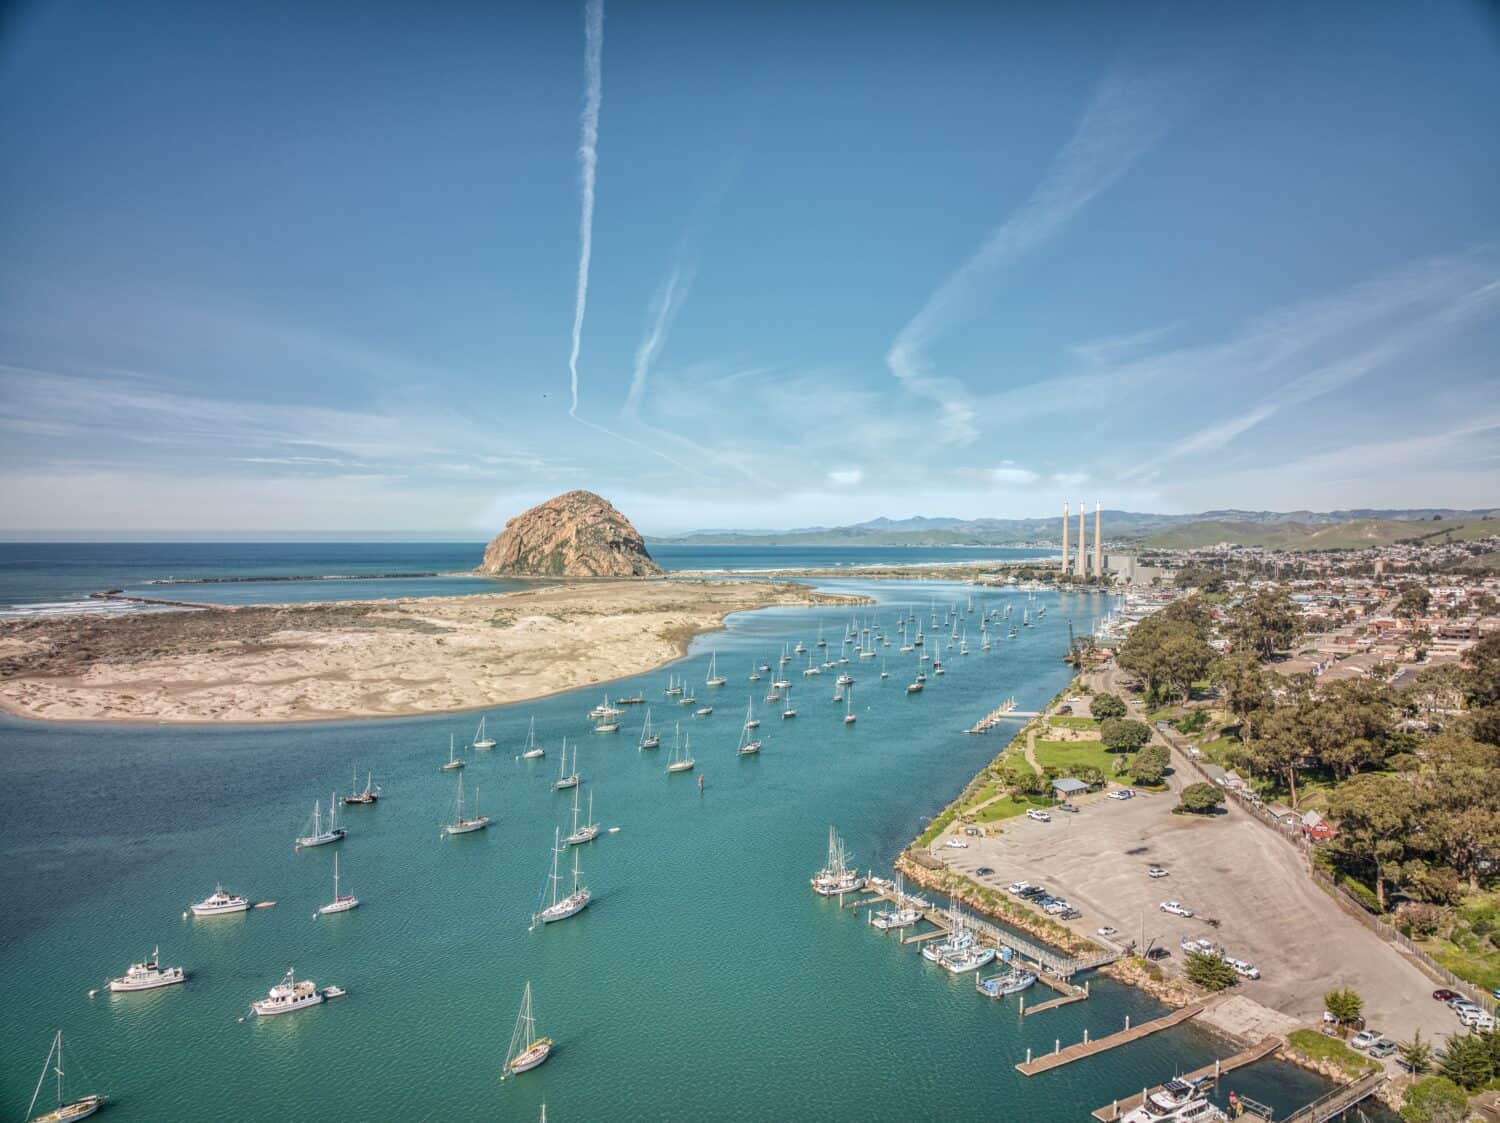 Aerial view over Morro Bay in Southern California